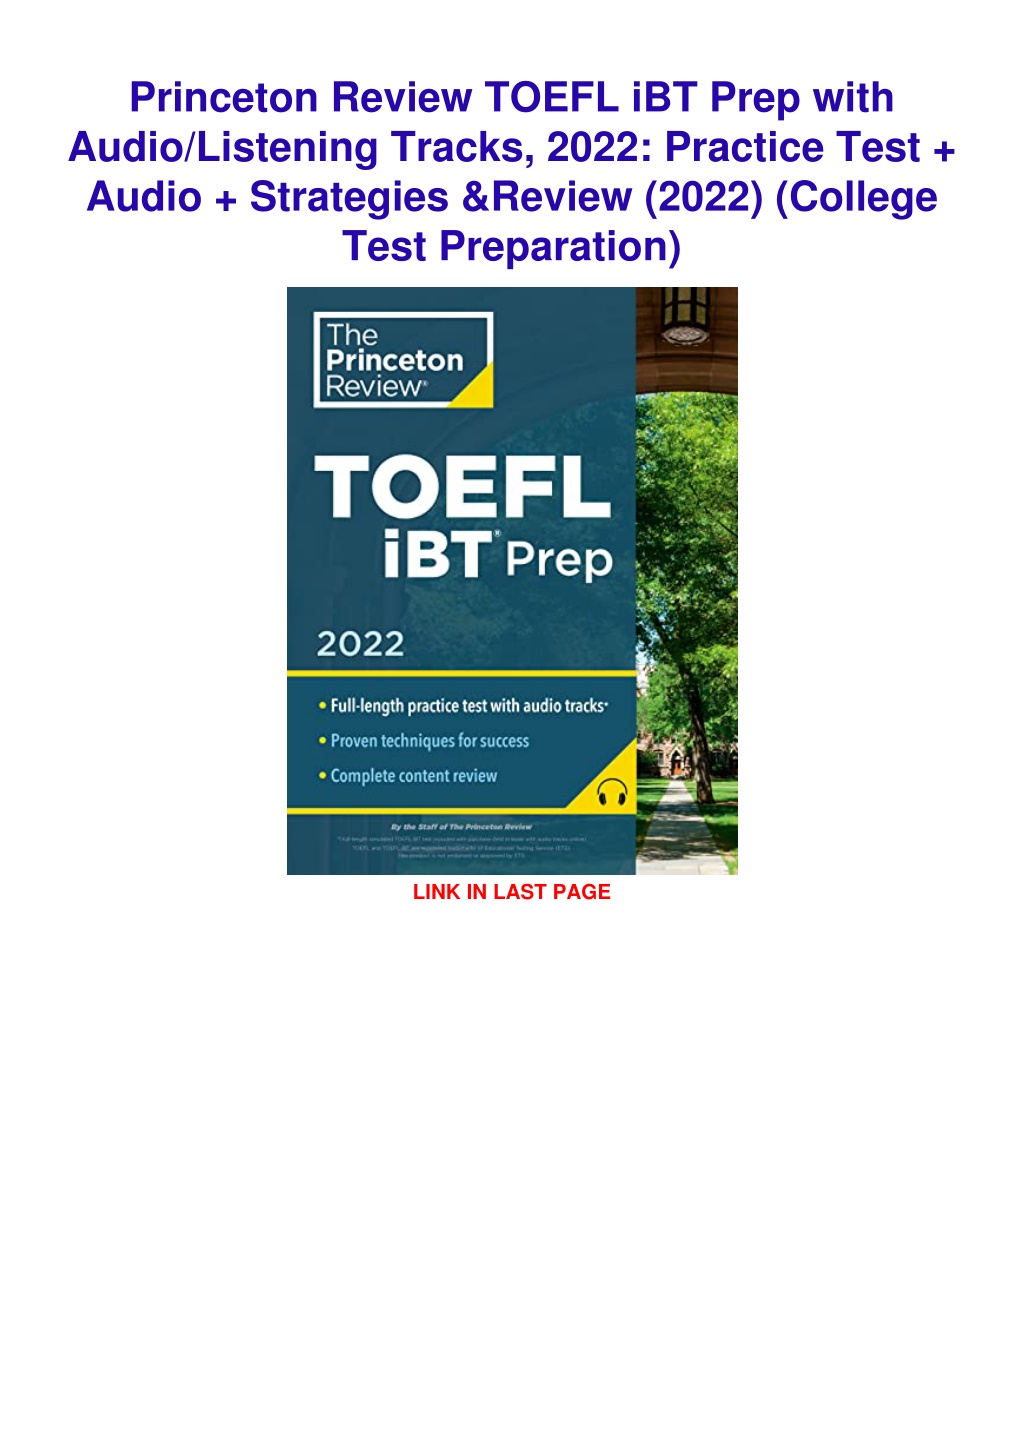 PPT get [PDF] Download Princeton Review TOEFL iBT Prep with Audio